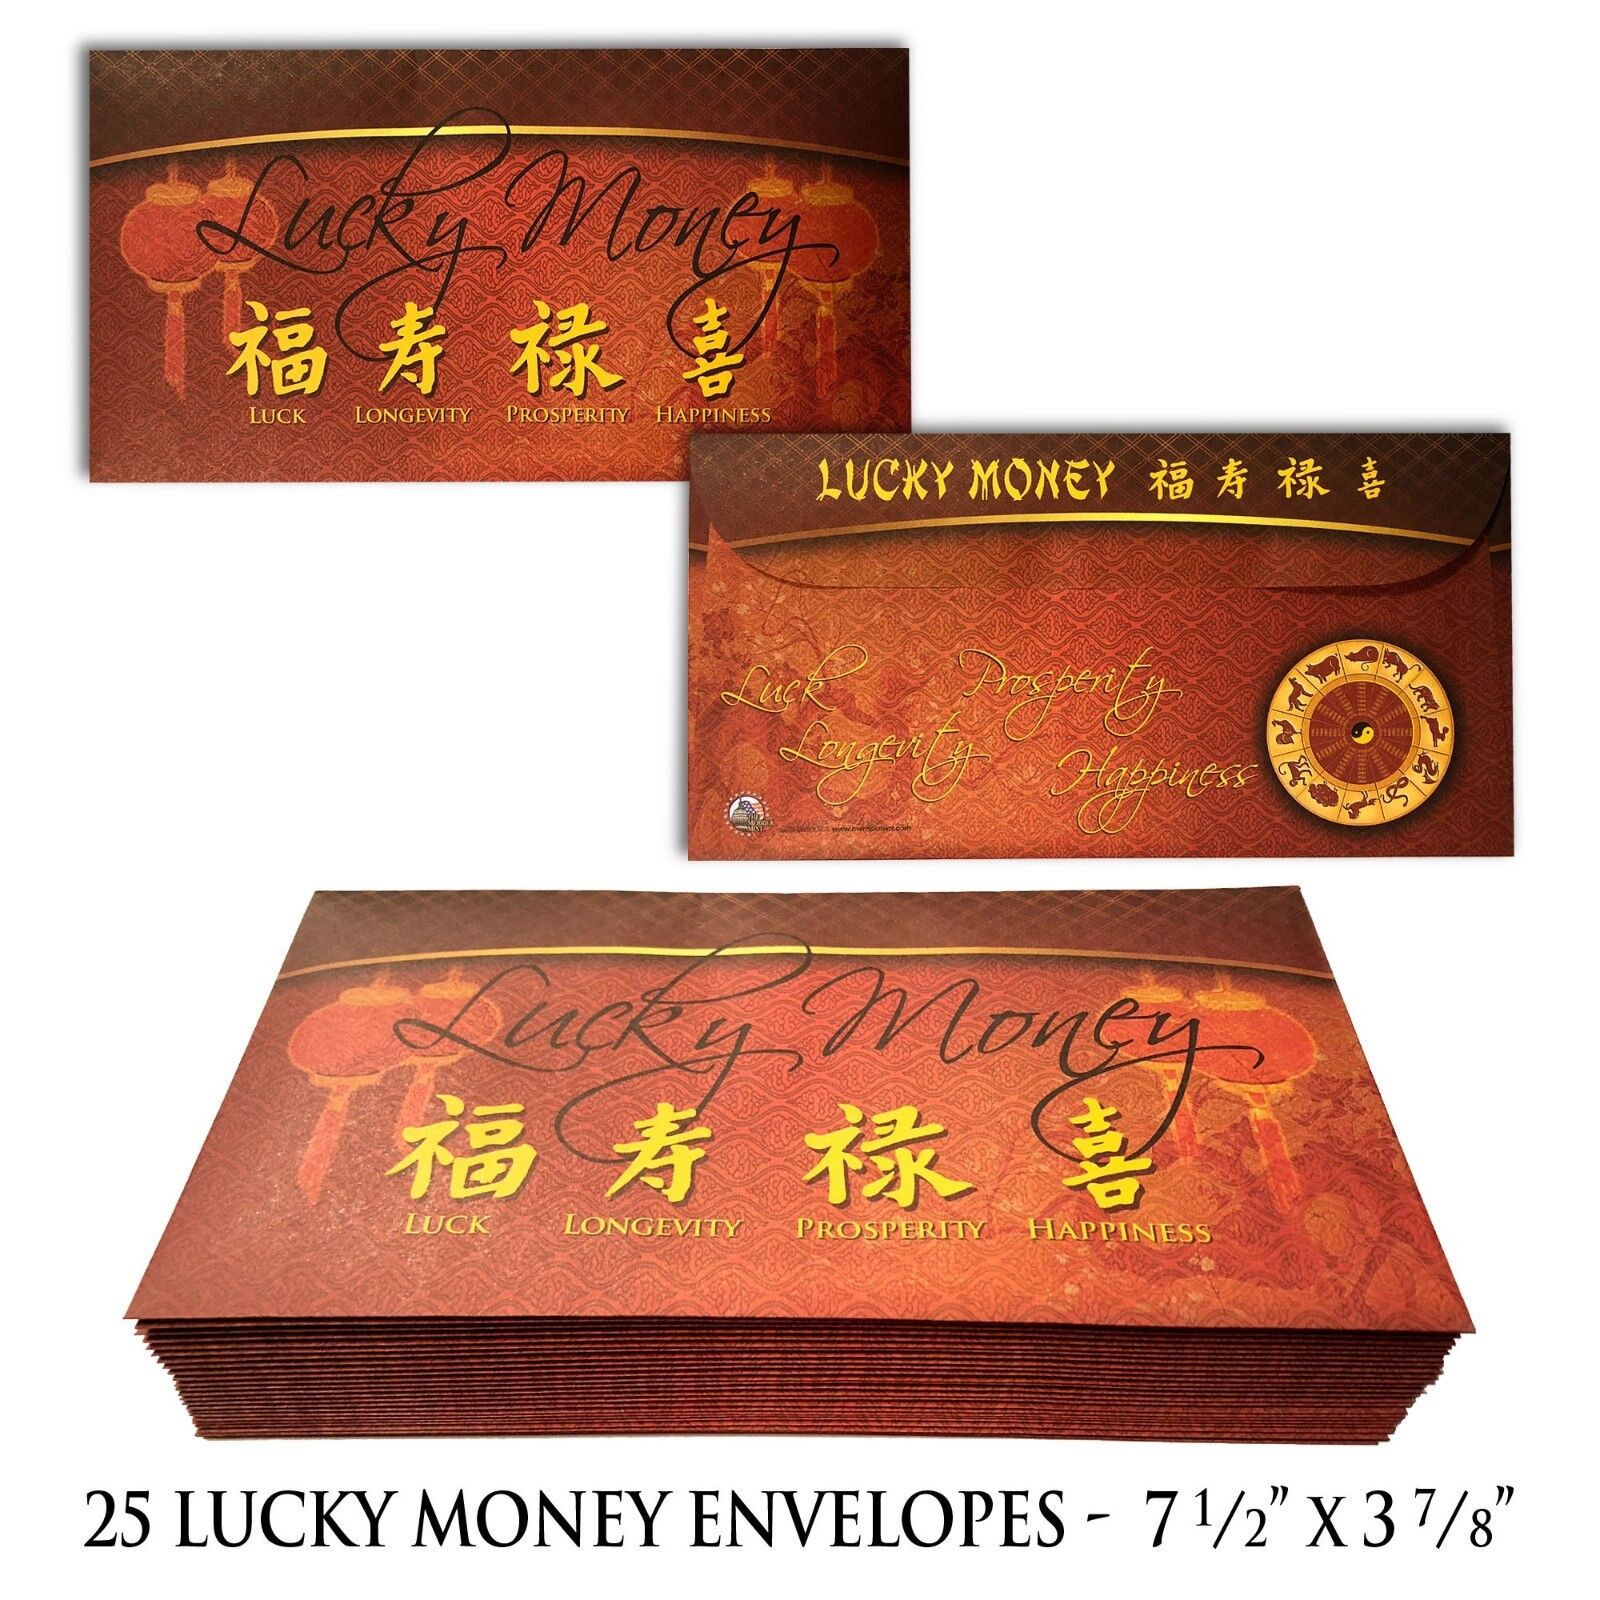 LUCKY MONEY Red Gold Envelope Chinese Lunar New Year Gift Currency - Pack of 25